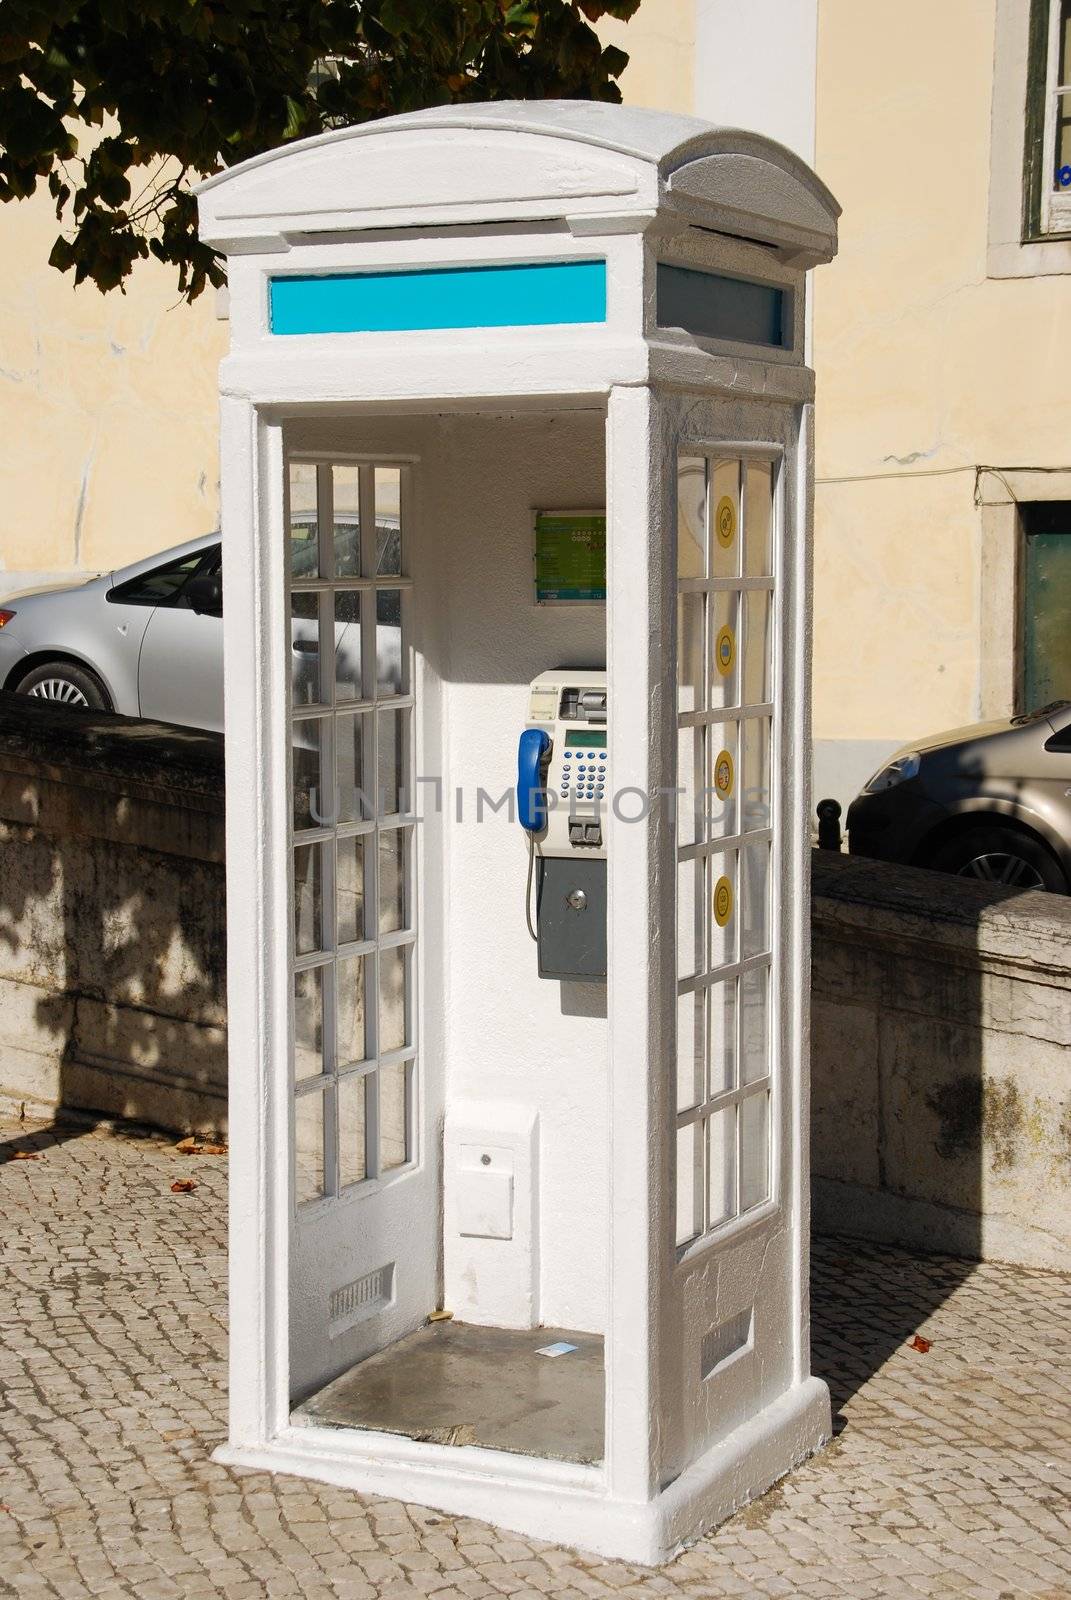 typical white telephone booth in Lisbon, Portugal